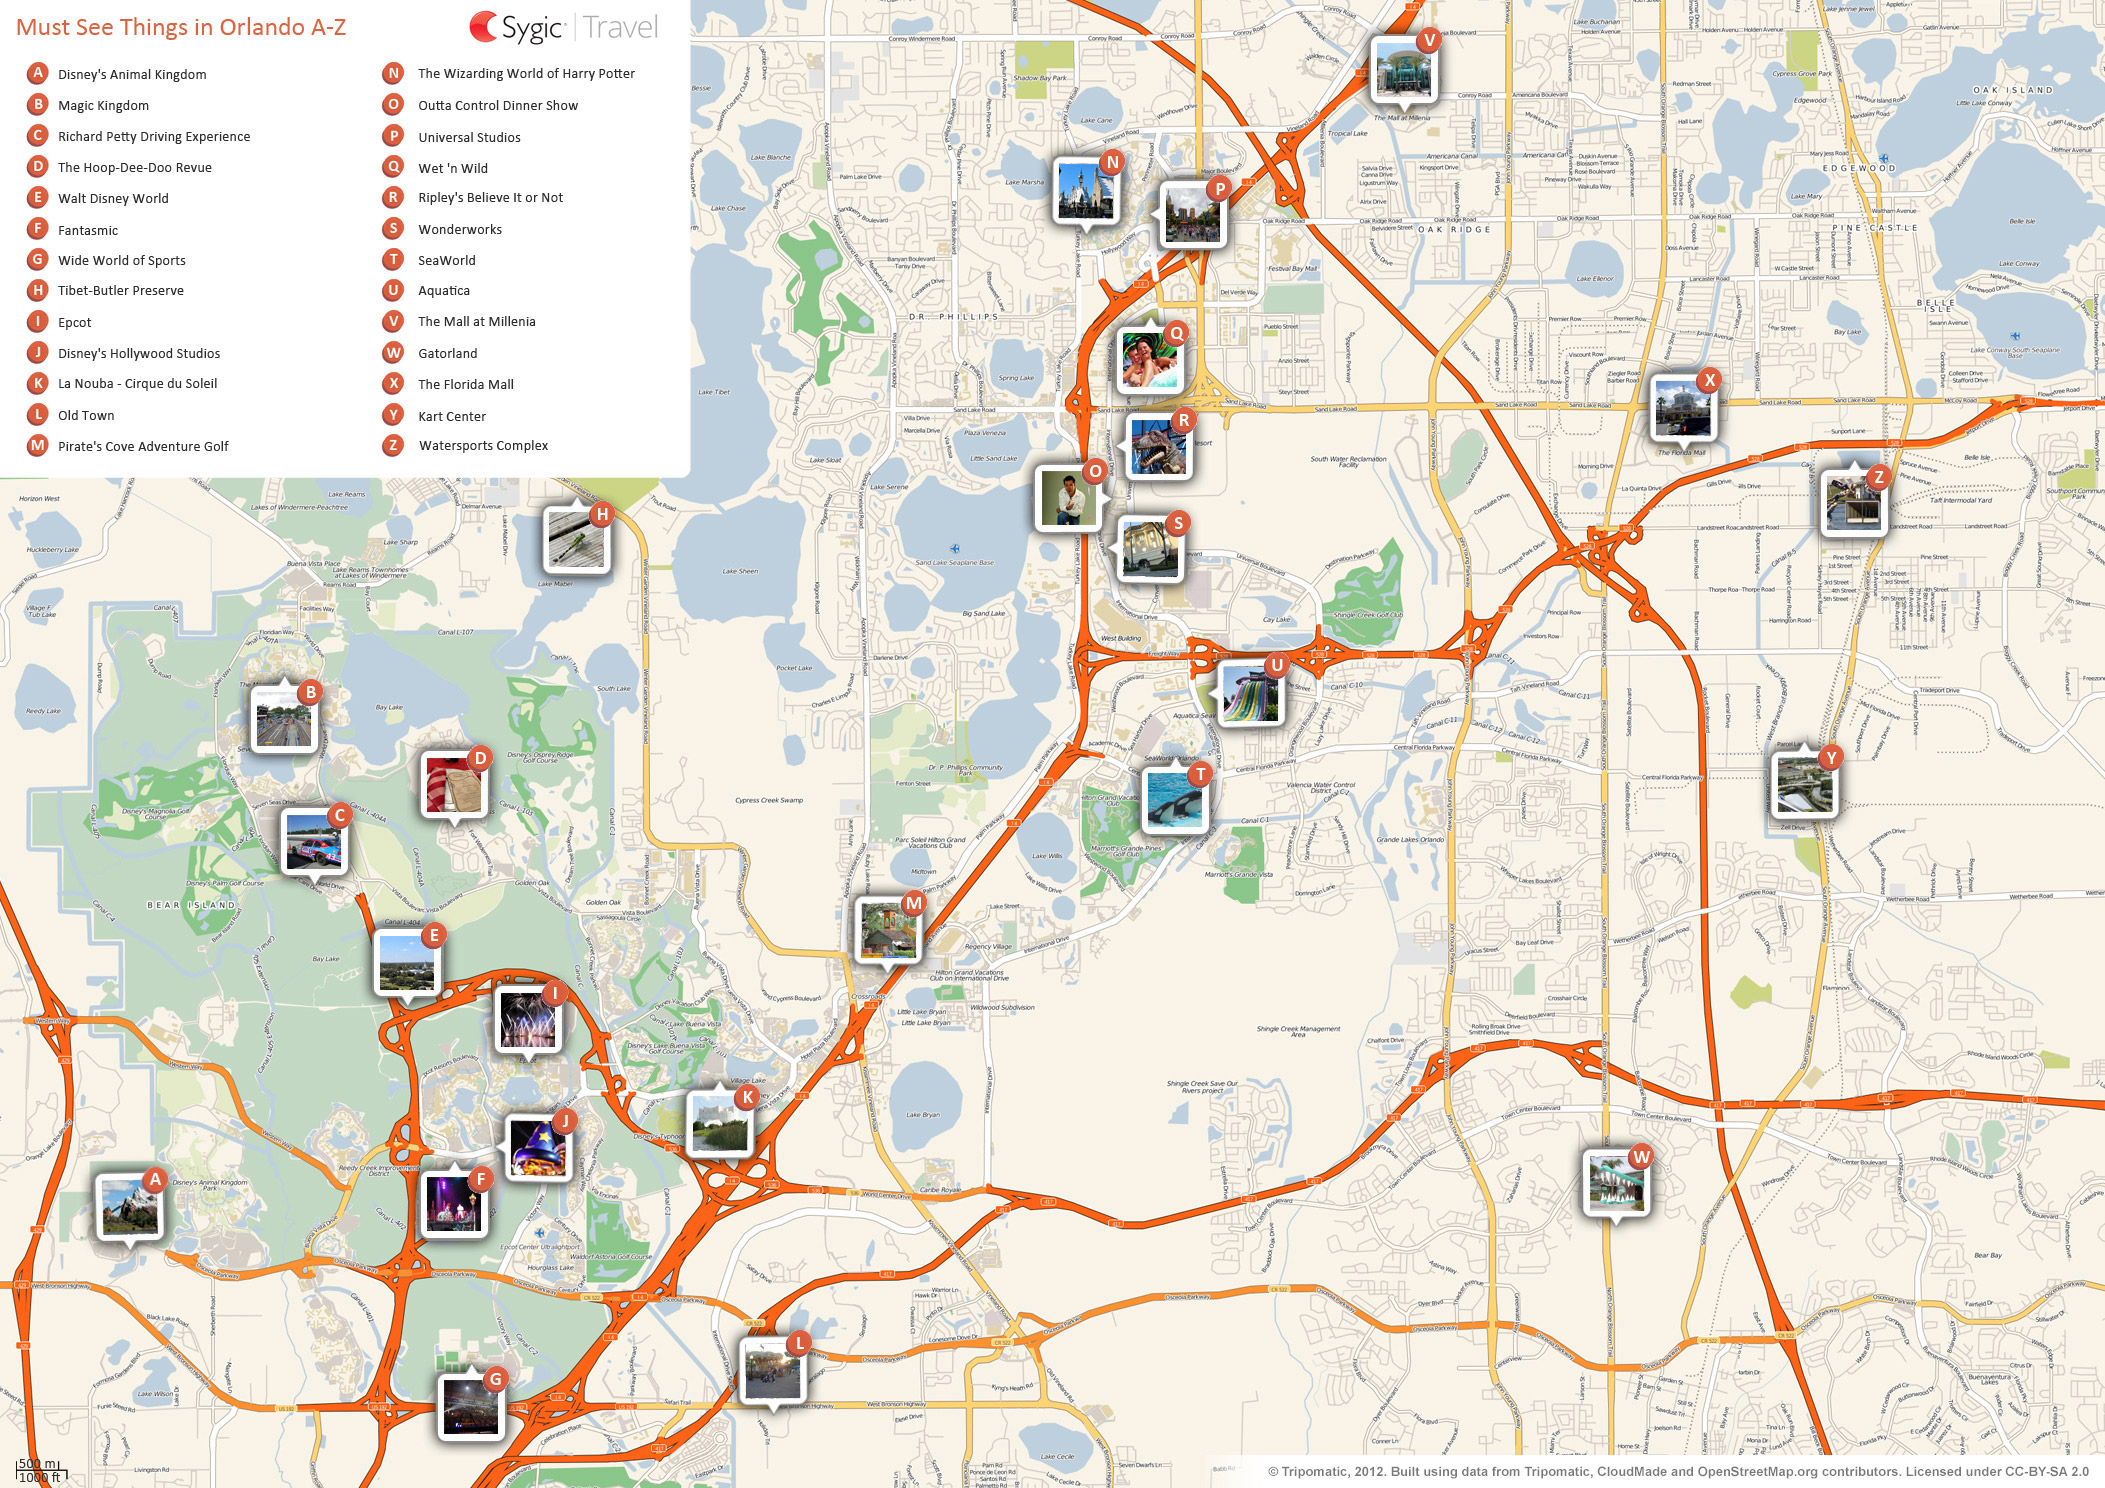 Map Of Orlando Attractions Sygic Travel